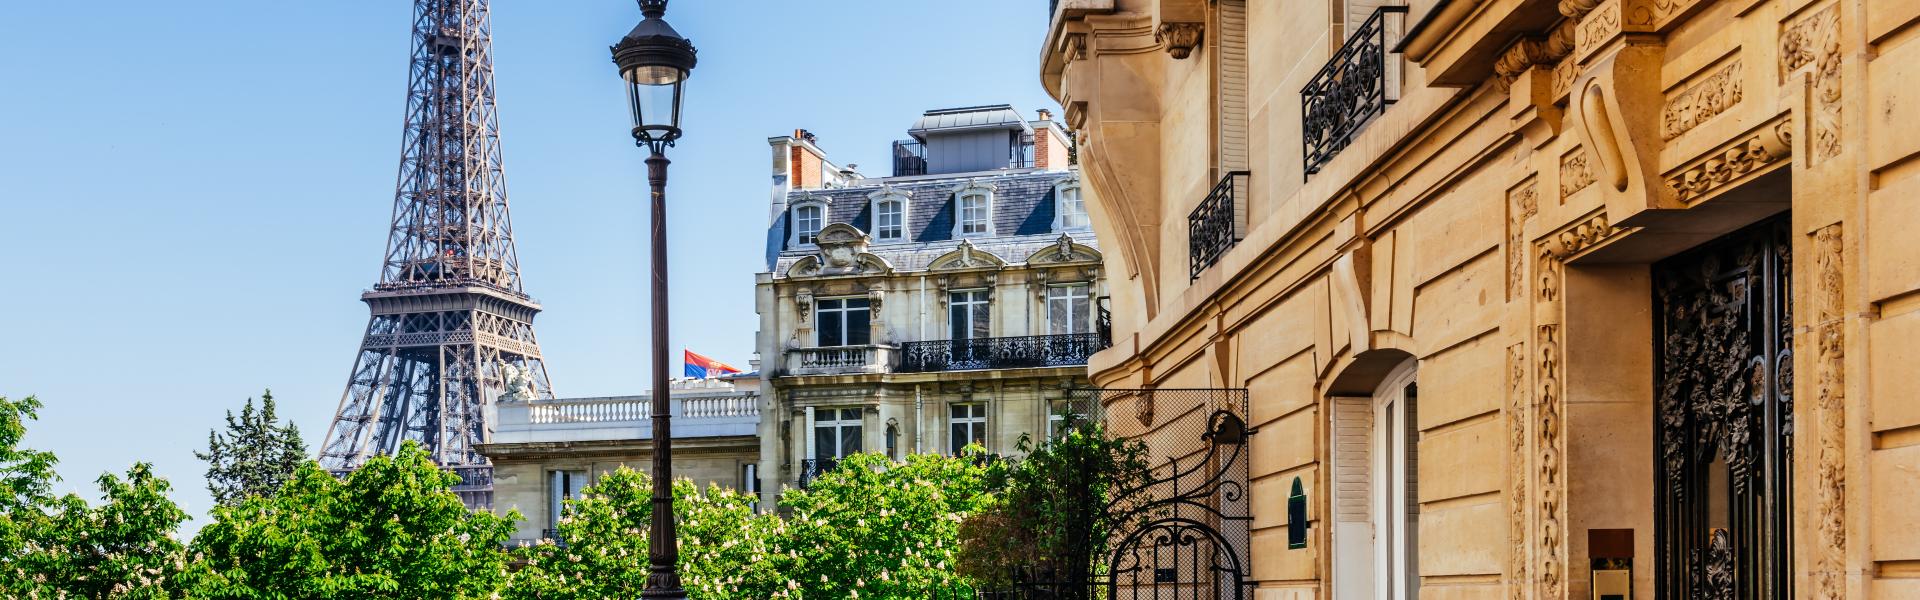 Find the perfect vacation home in Paris - Casamundo